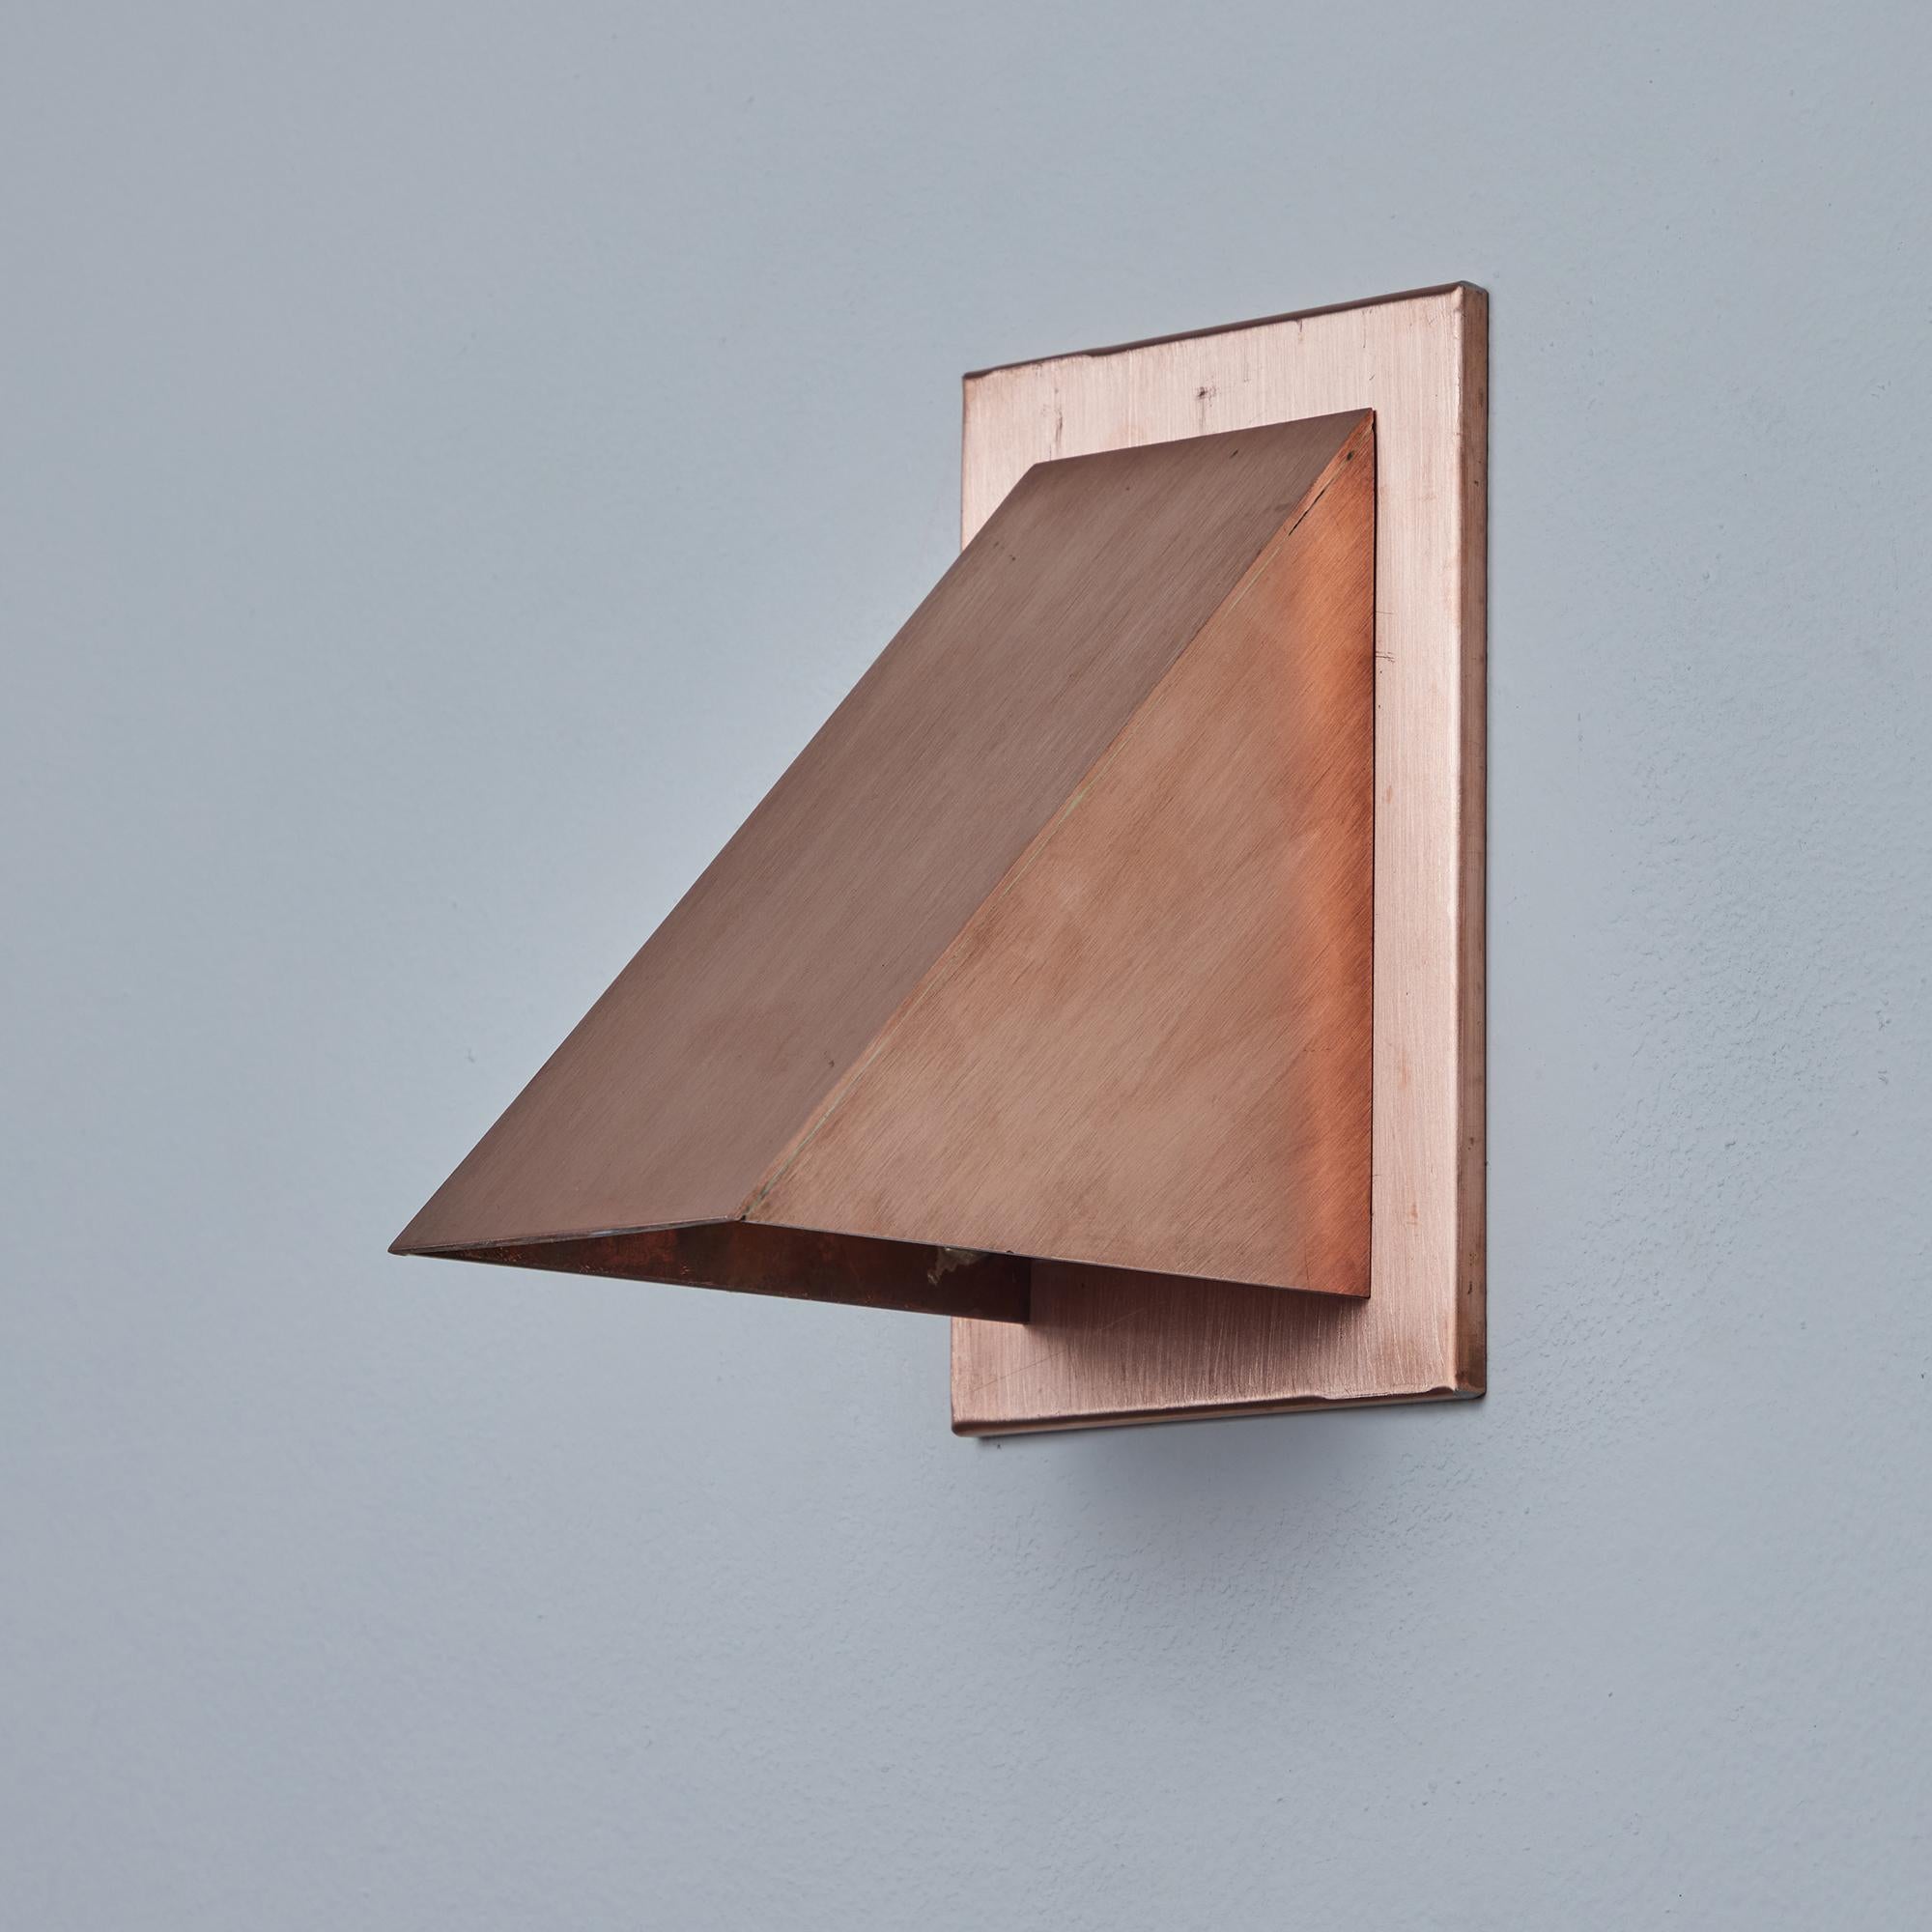 Pair of Jonas Bohlin 'Oxid' Raw Copper Outdoor Wall Lights for Örsjö. Executed in raw unlacquered copper with an opaline glass diffuser. An incredibly refined and clean geometric design that is quintessentially Scandinavian. For indoor or outdoor